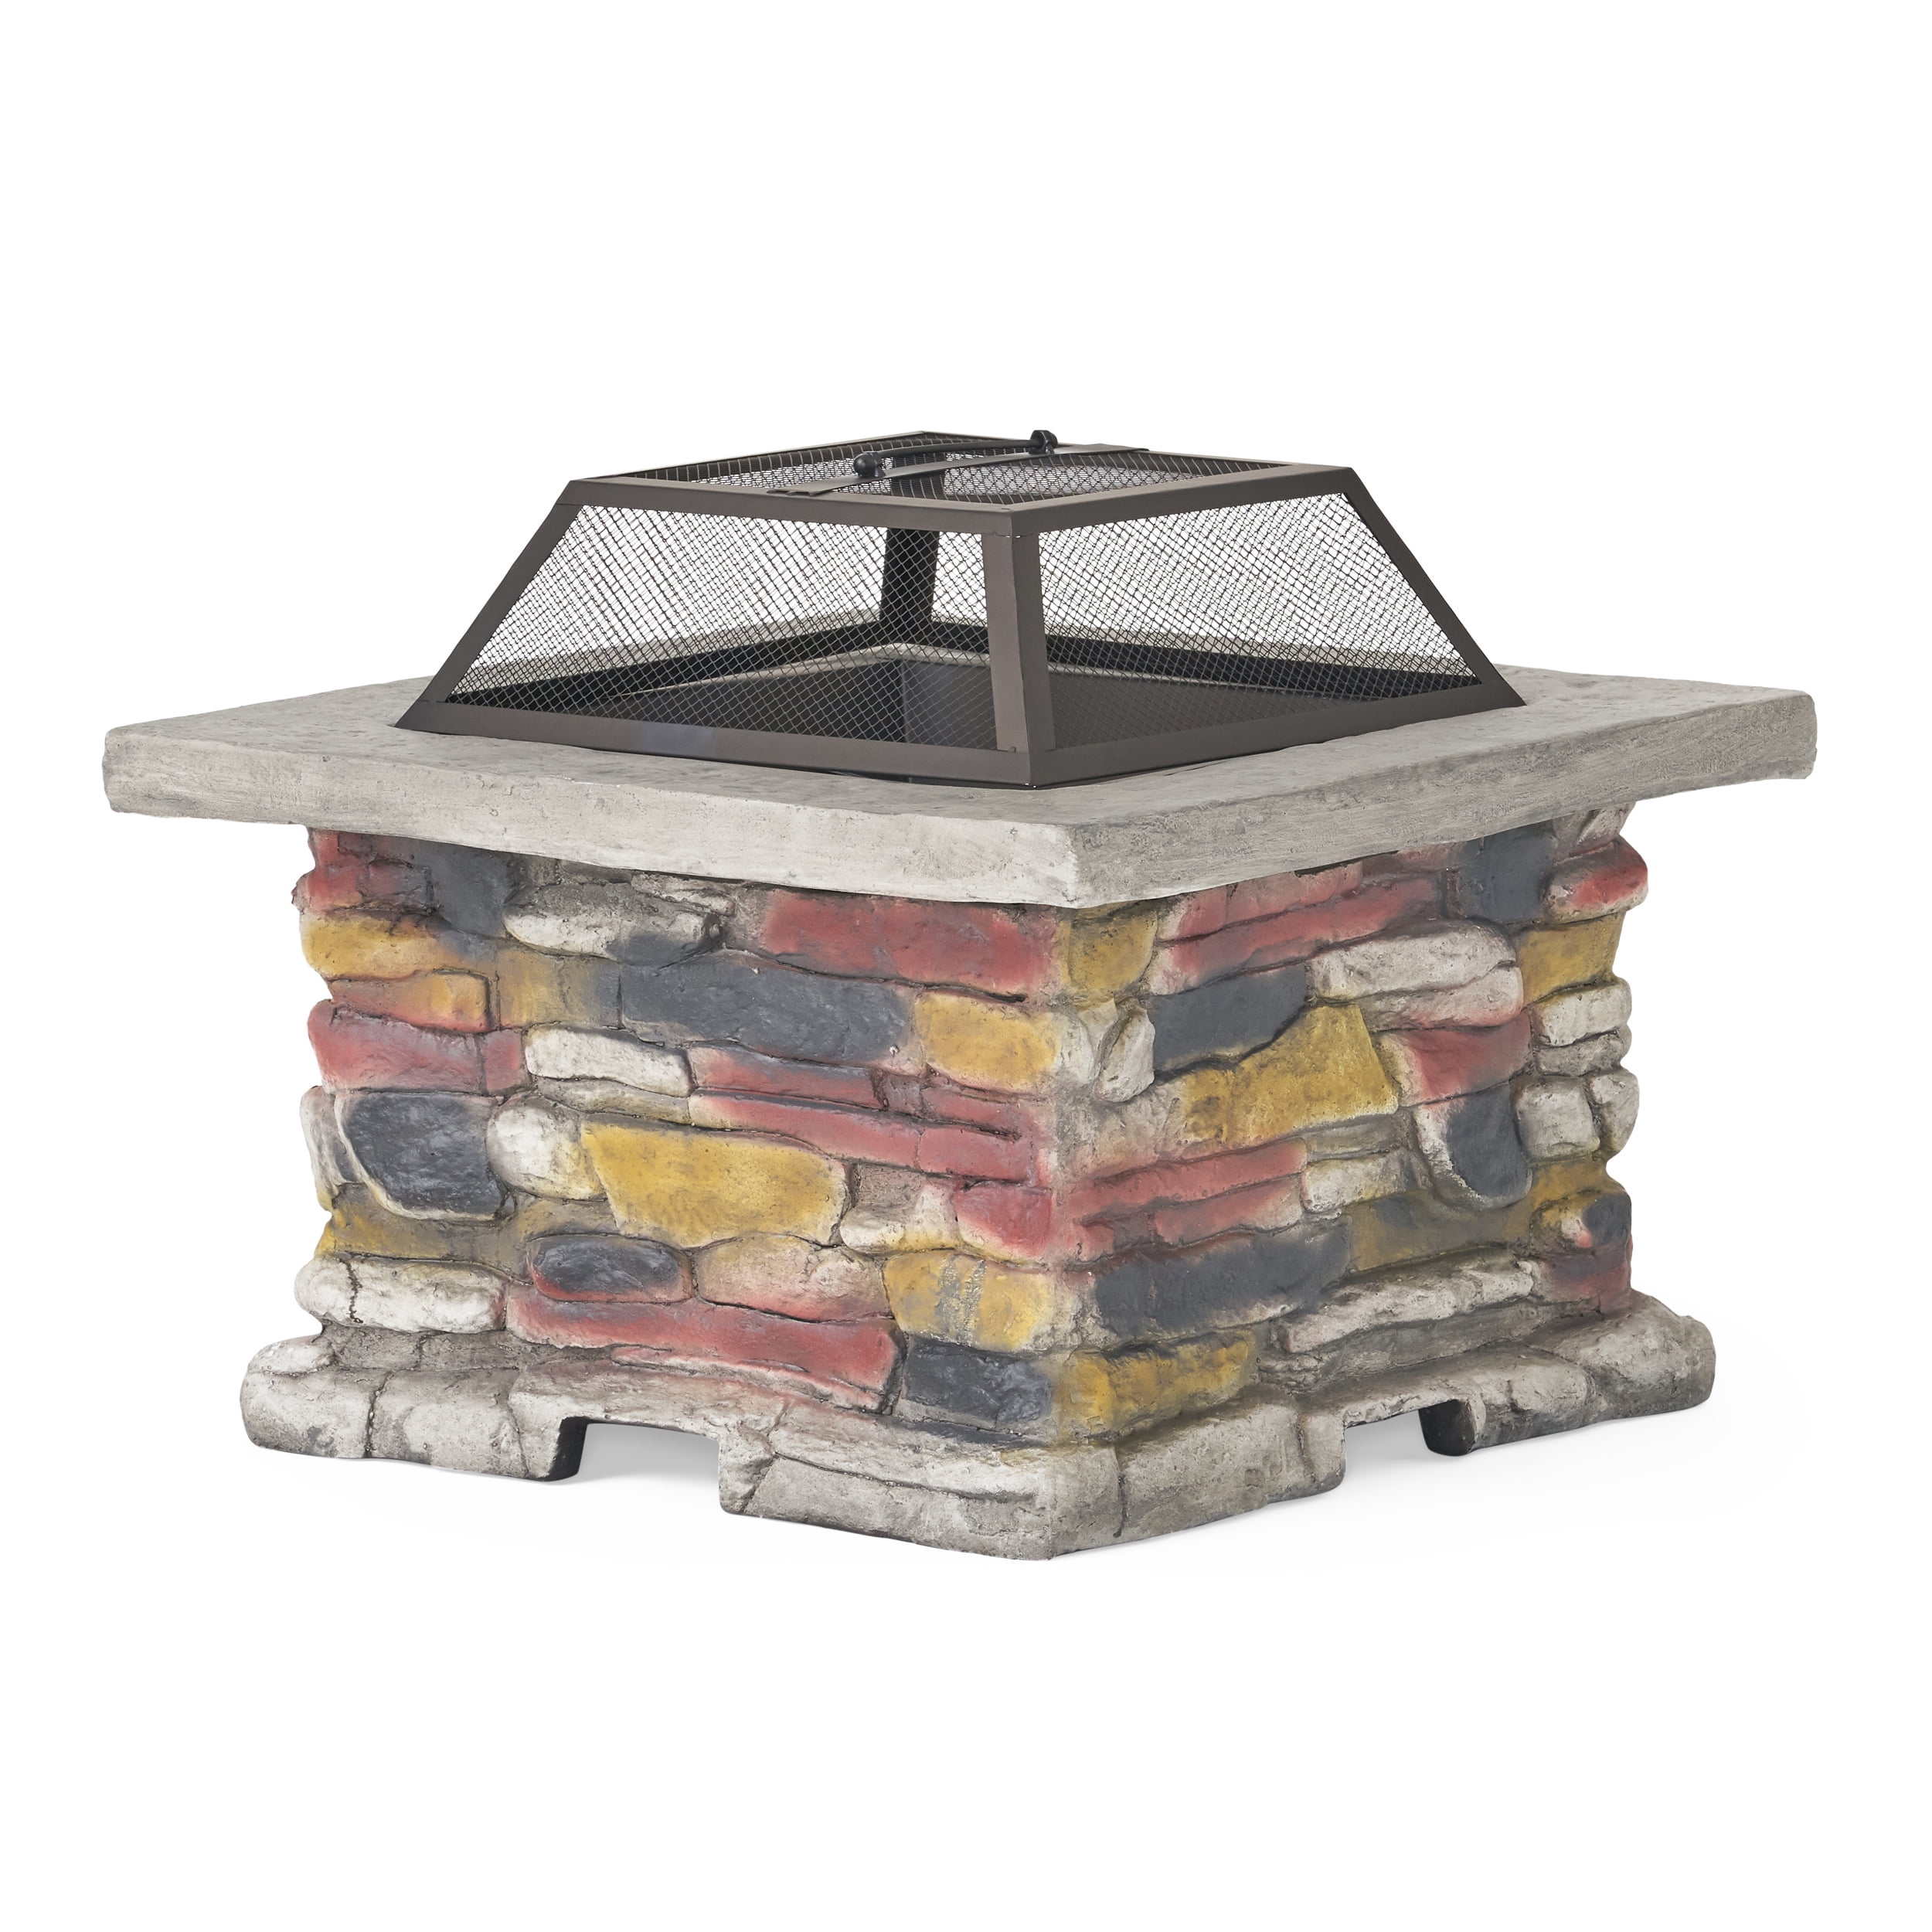 Kayden Outdoor Natural Stone Fire Pit, Rona Fire Pit